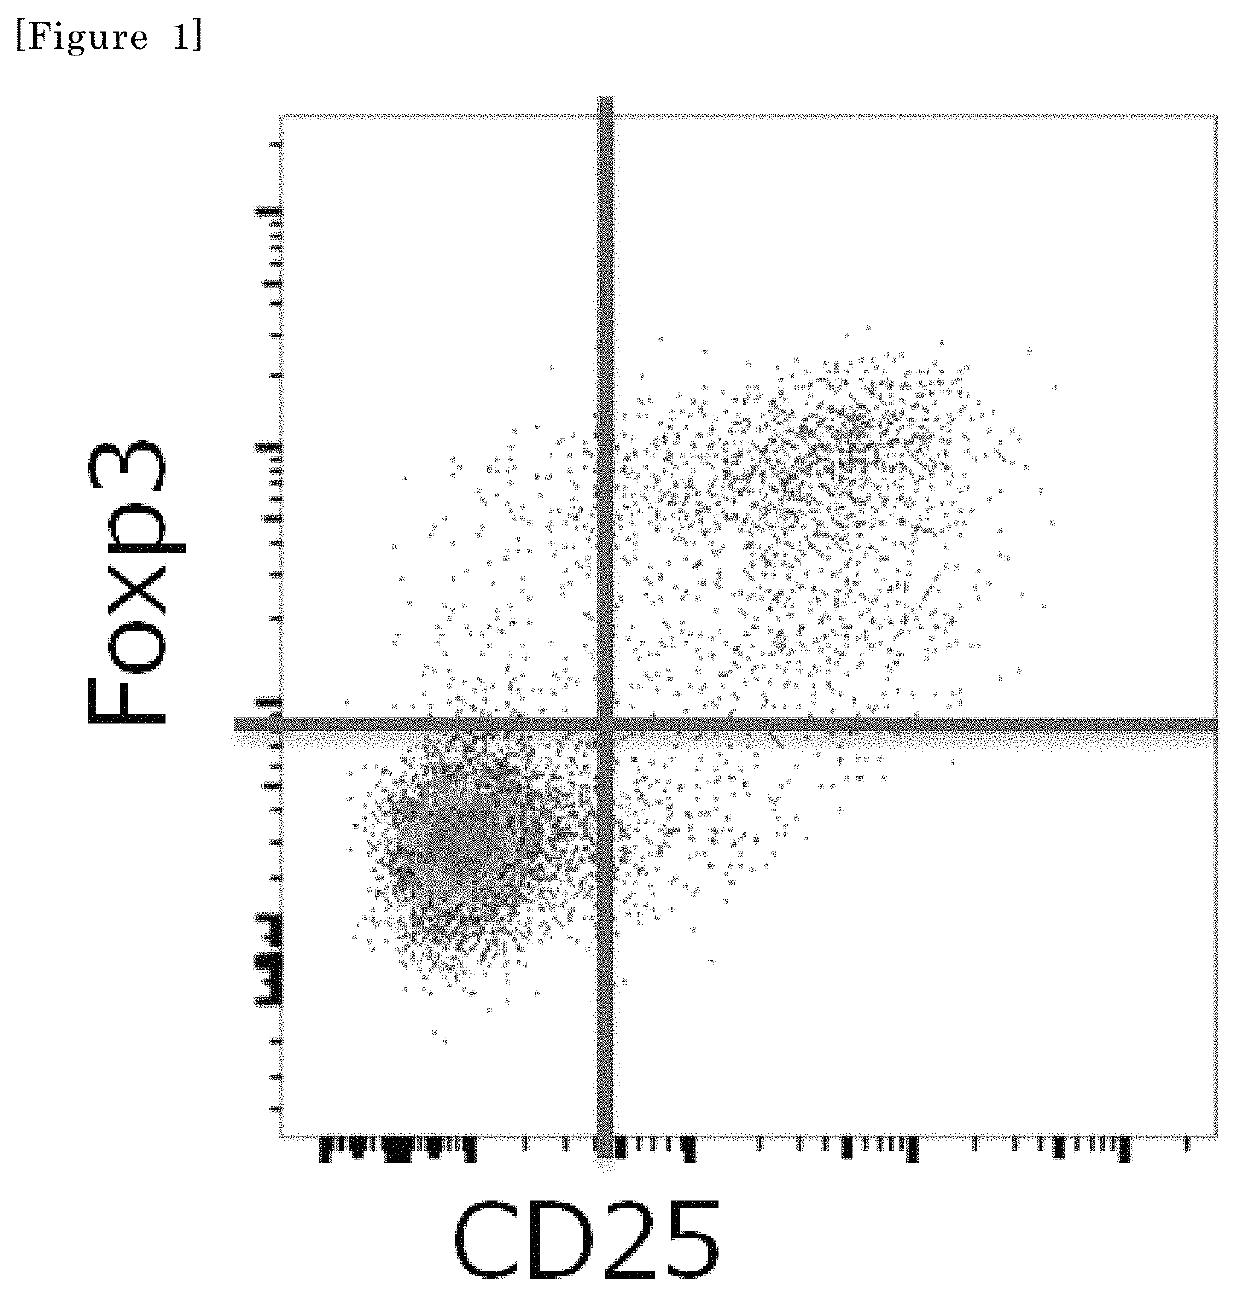 Method of treating cancer with an anti-CCR8 having antibody-dependent cell-mediated cytotoxicity (ADCC) activity against cells expressing CCR8